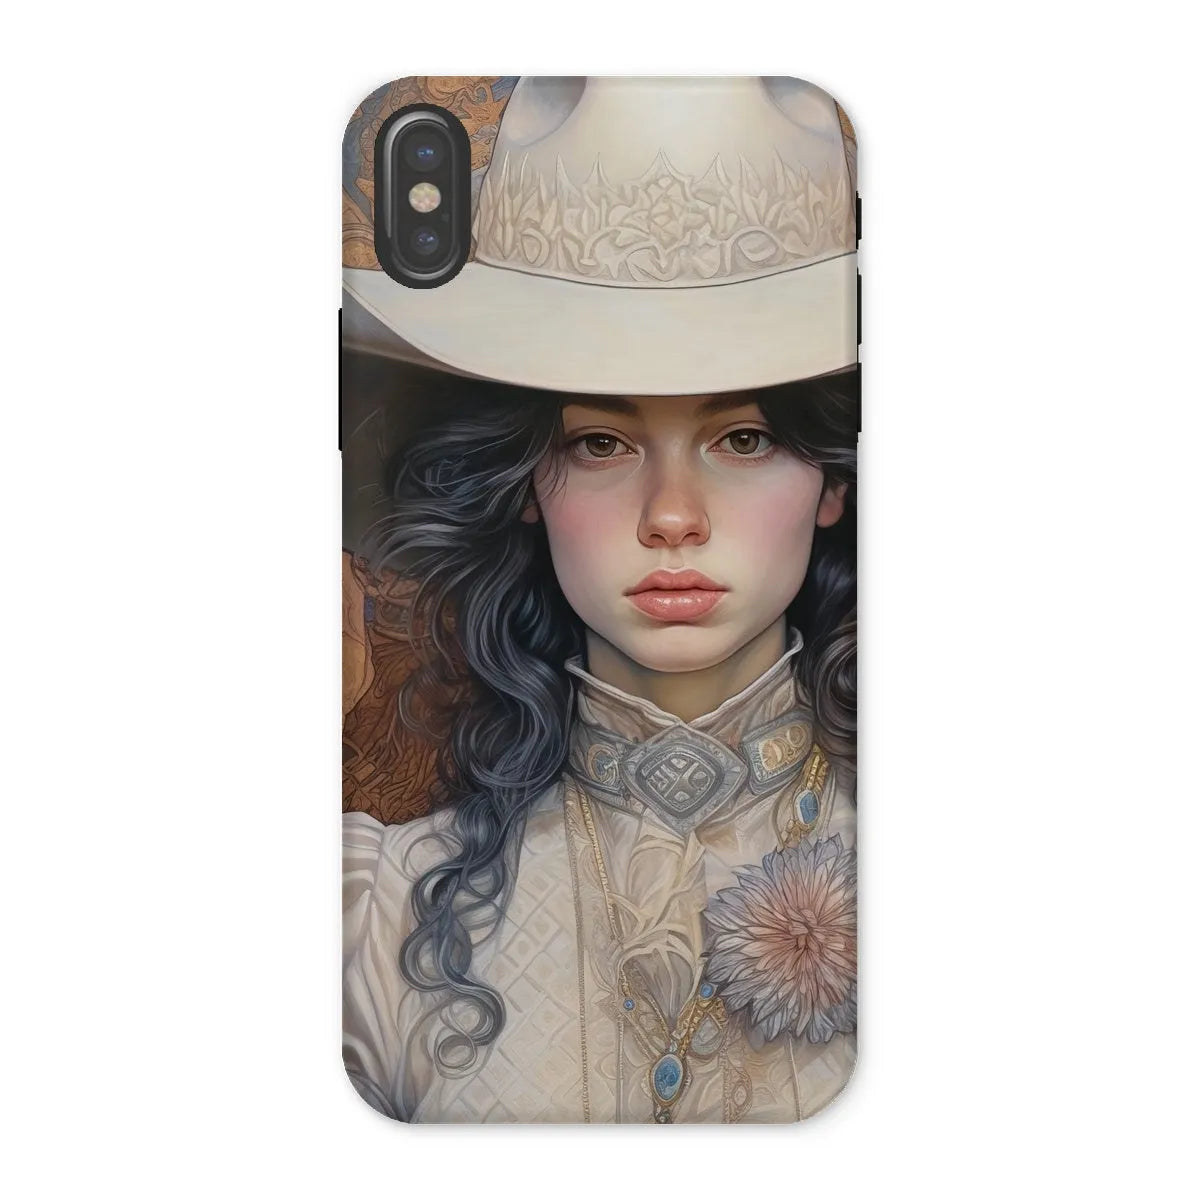 Helena The Lesbian Cowgirl - Sapphic Art Phone Case - Iphone x / Matte - Mobile Phone Cases - Aesthetic Art